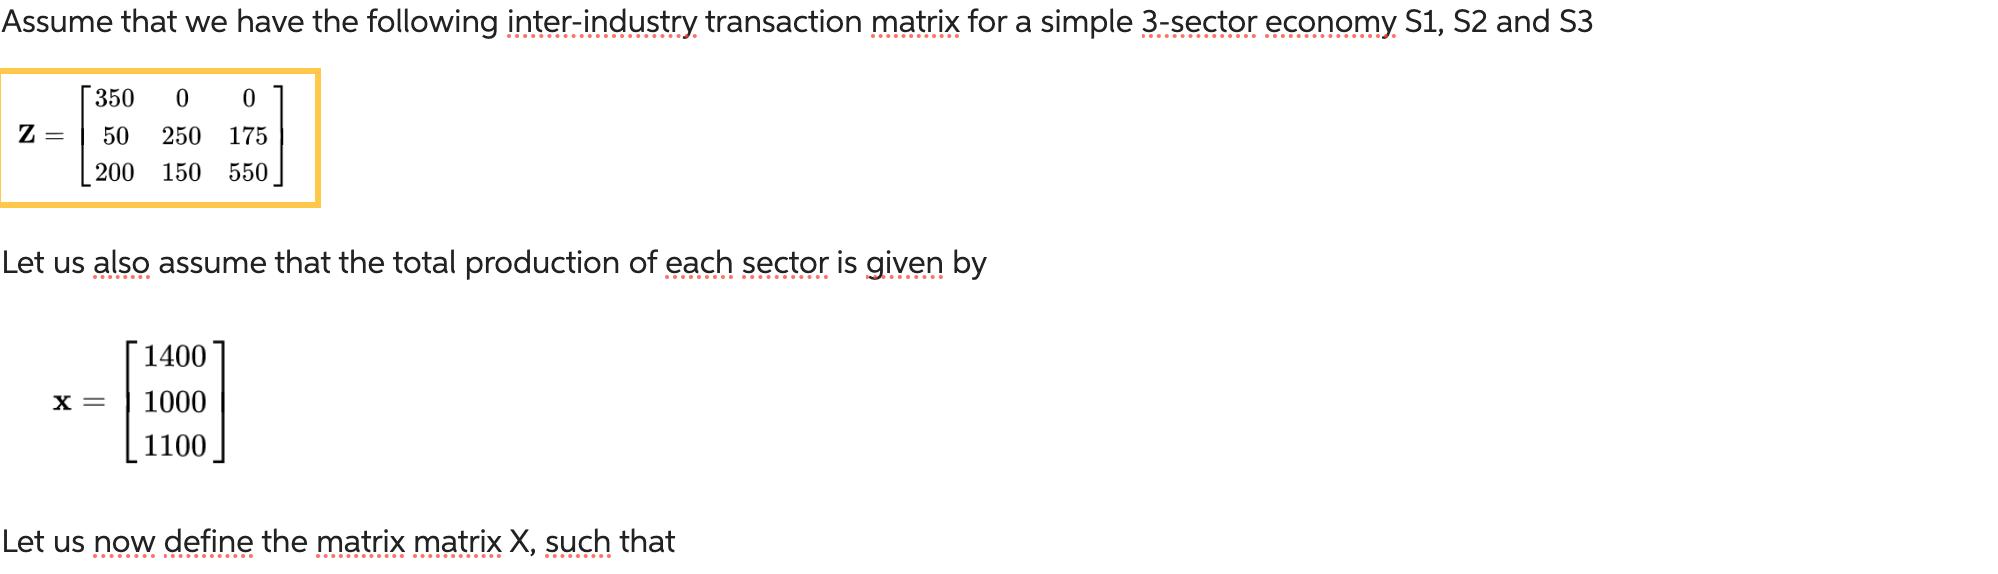 Assume that we have the following inter-industry transaction matrix for a simple 3-sector economy S1, S2 and